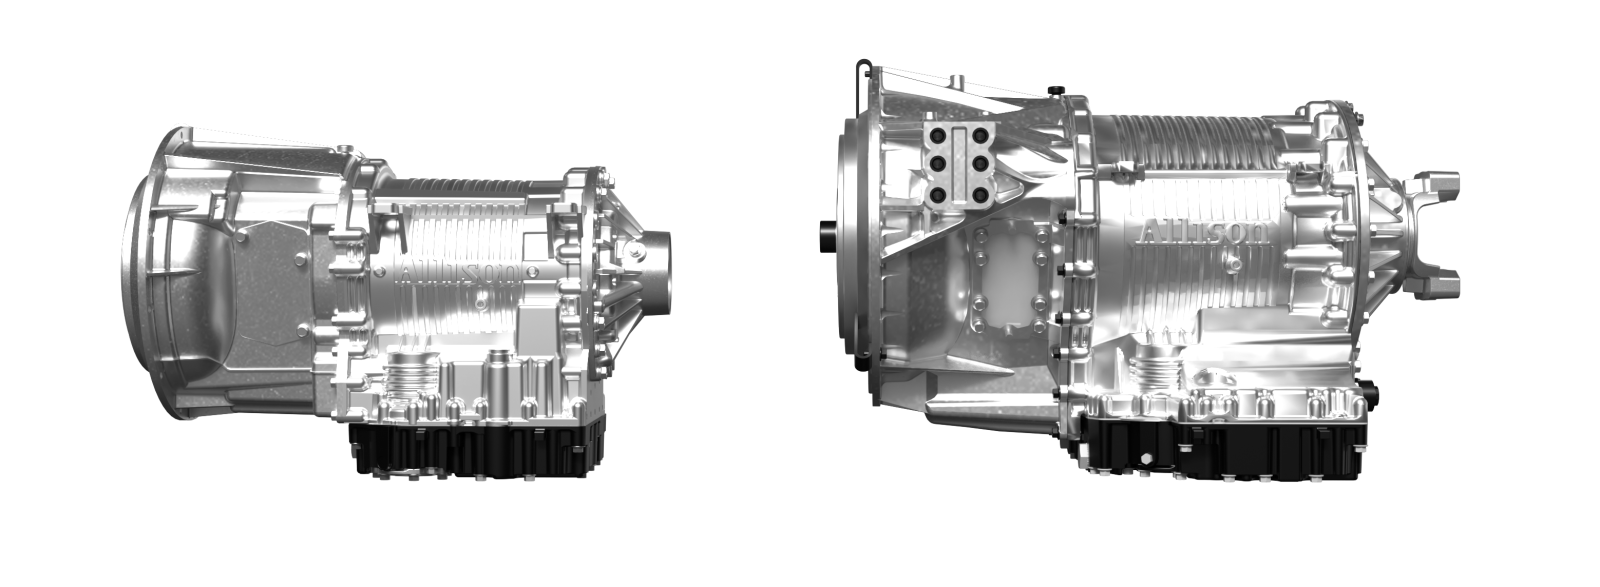 An image of the Allison 3000 RDS Series transmission on the left and the Allison 4000 RDS Series transmission on the right.